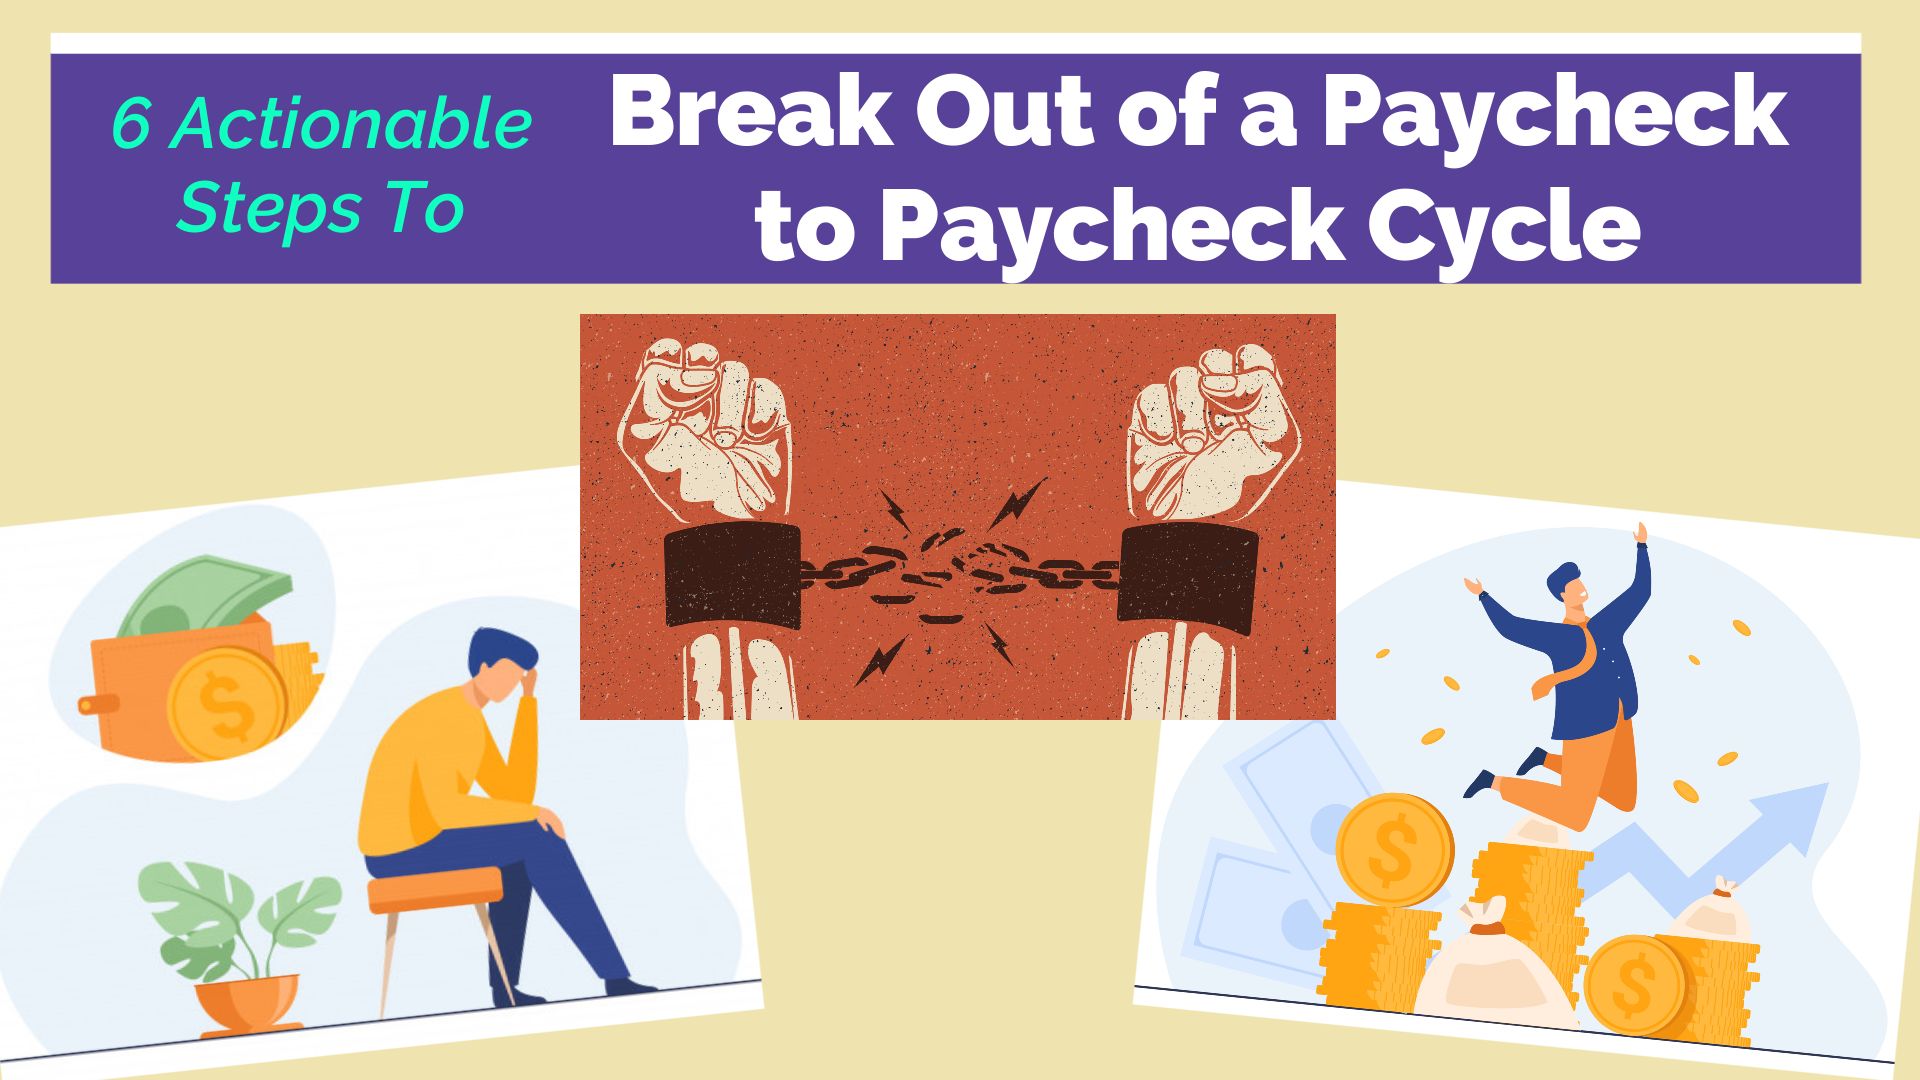 6 Actionable Steps to Break Out of A Paycheck to Paycheck Cycle